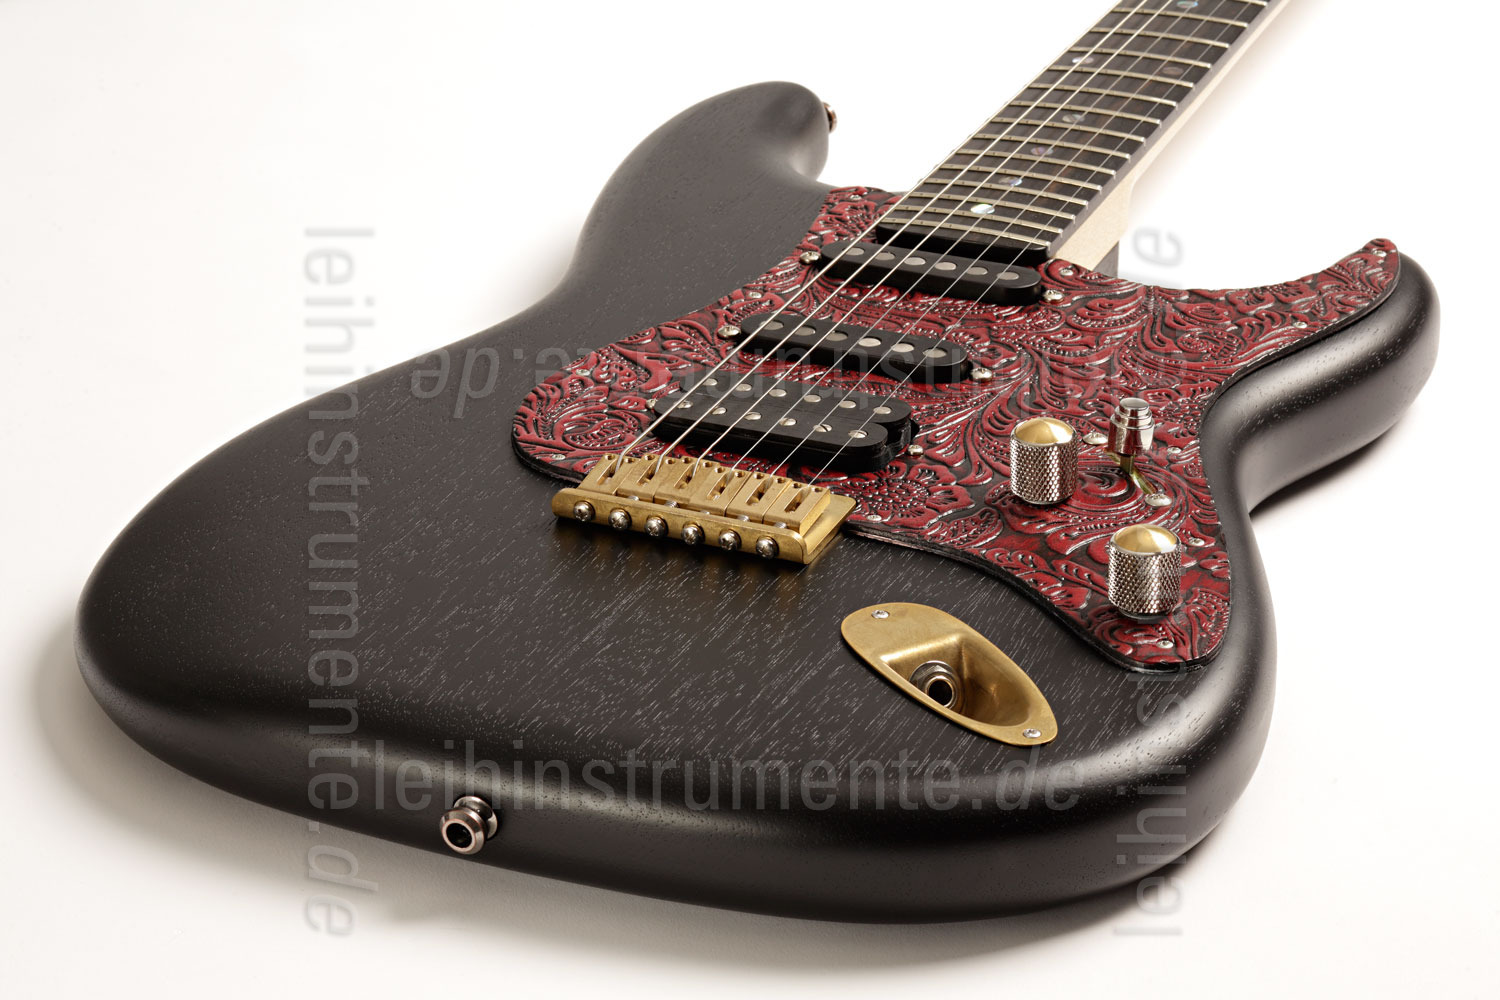 to article description / price Electric Guitar BERSTECHER Deluxe Vintage - Black / Floral Red + hard case - made in Germany